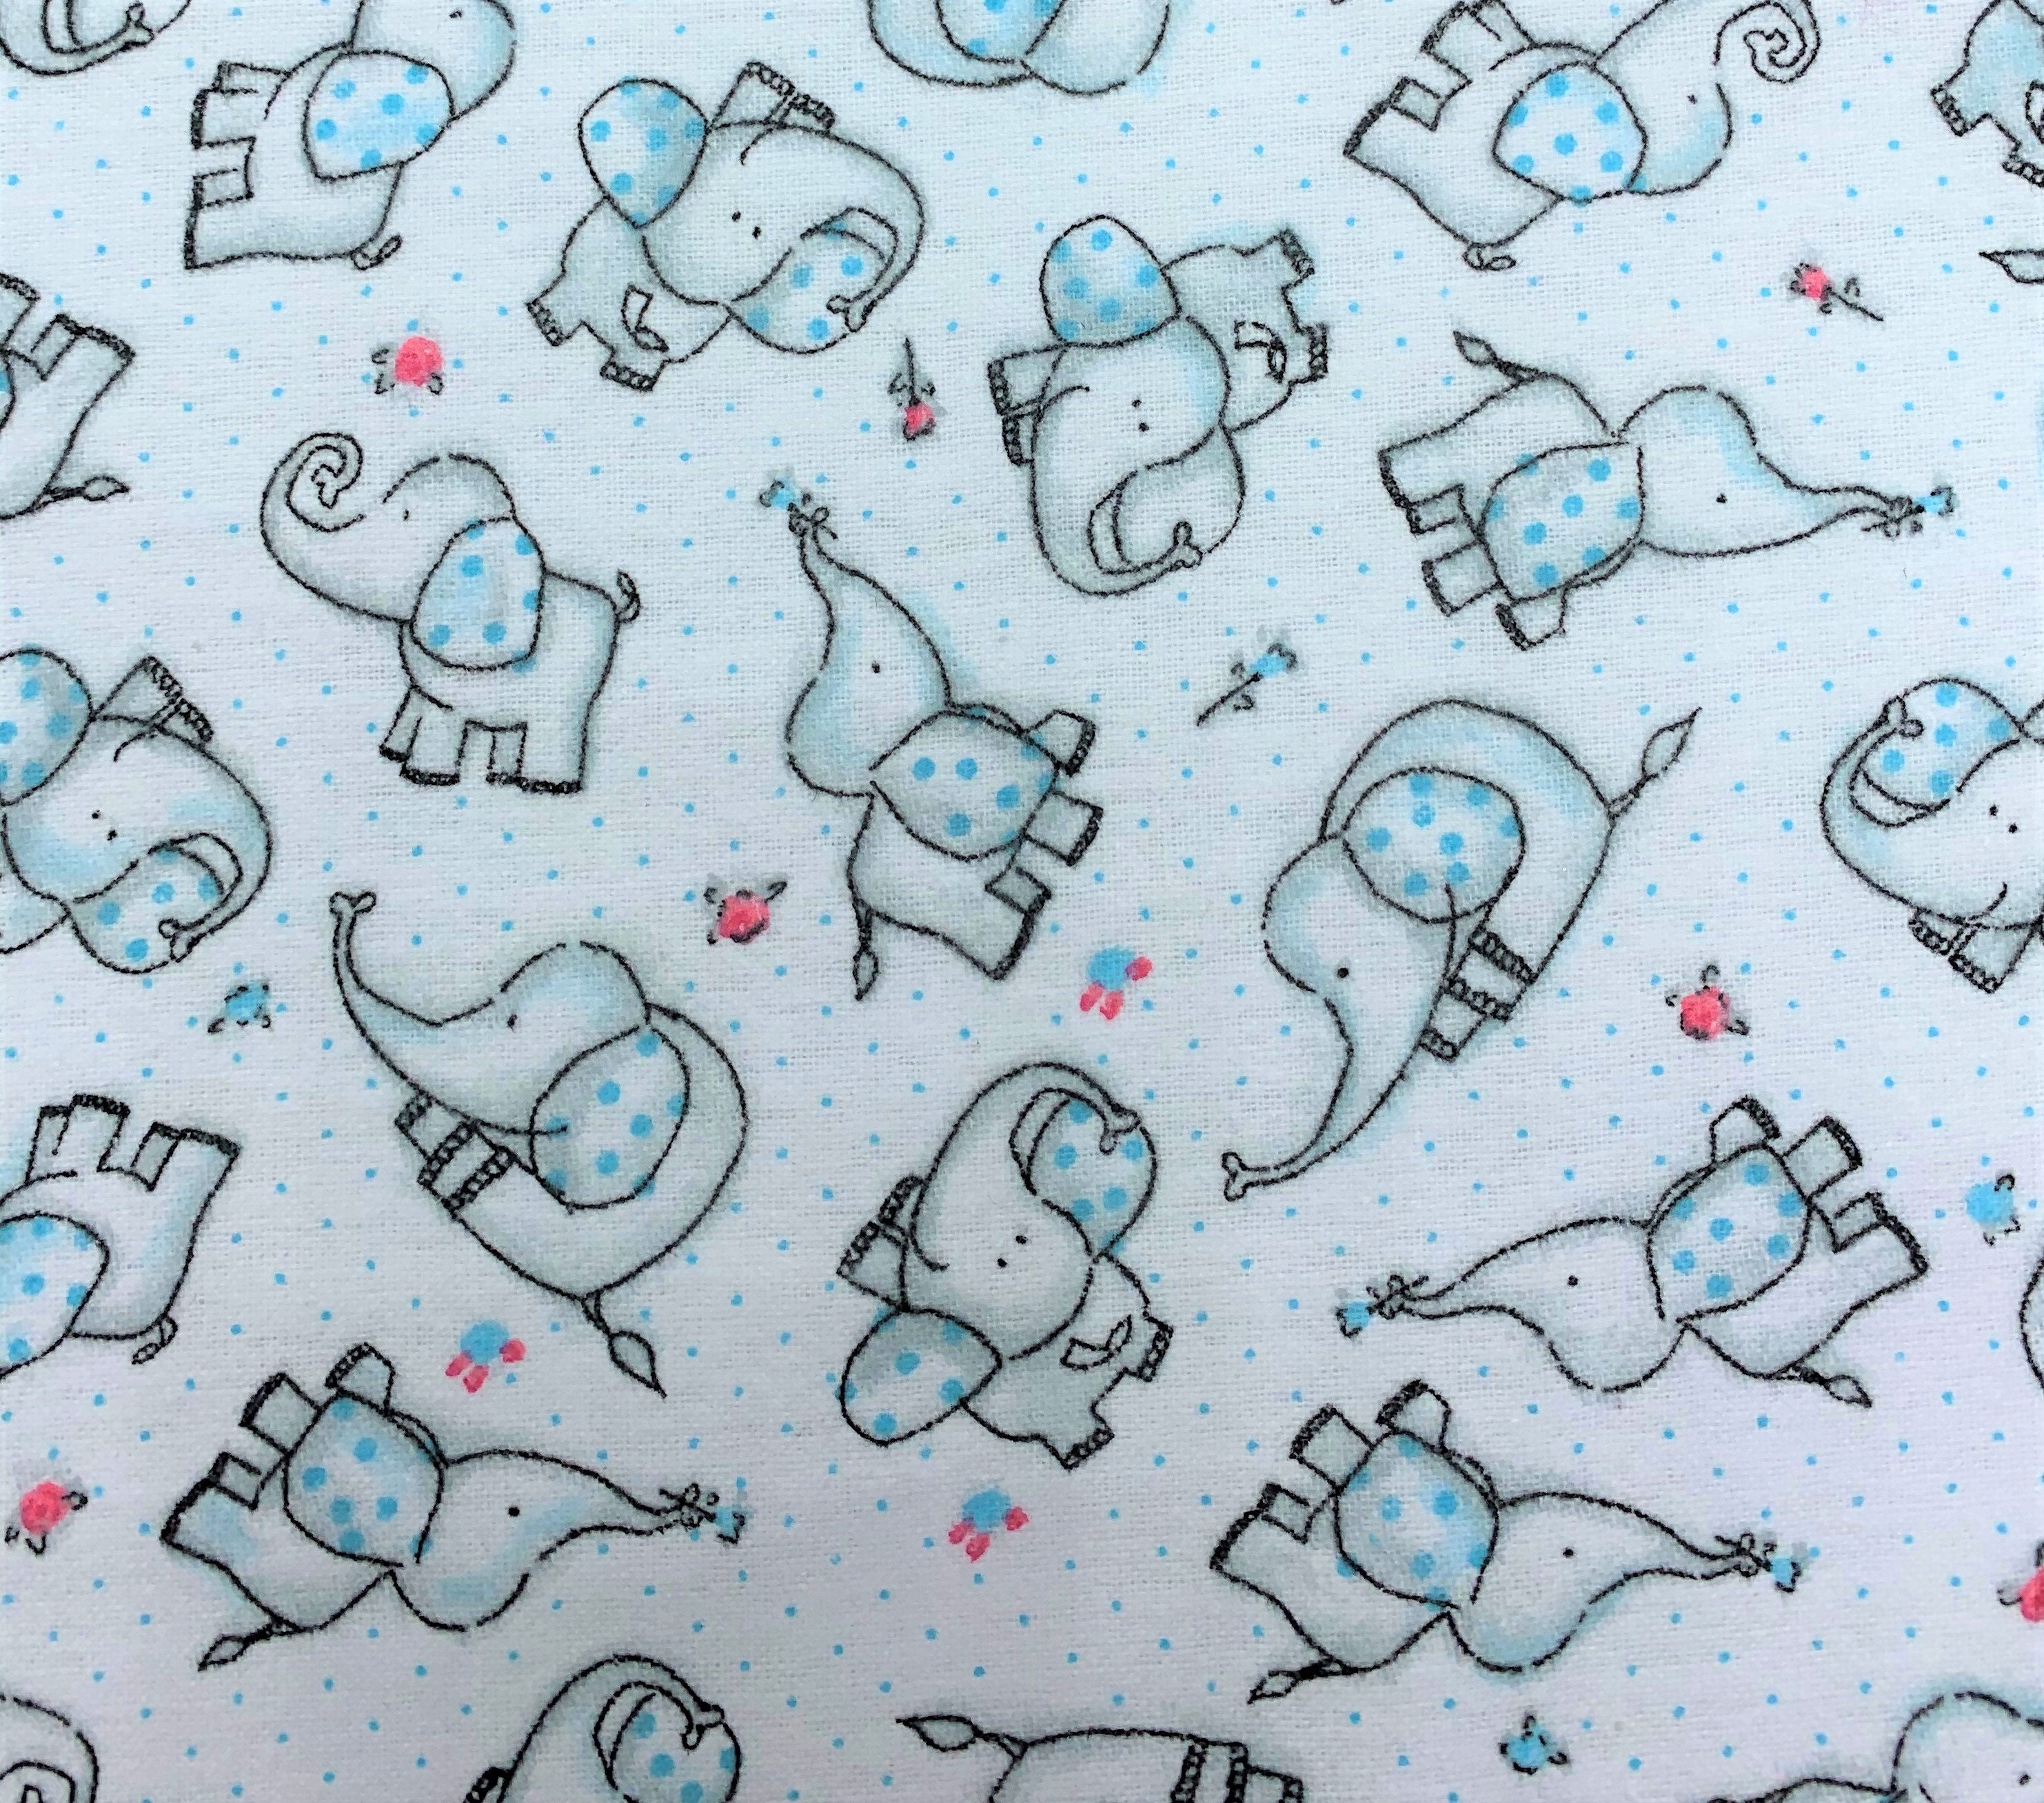 815 Flannel fabric white background blue tiny dots /& flowers with tossed gray elephants blue dots on ears sold by the yard.